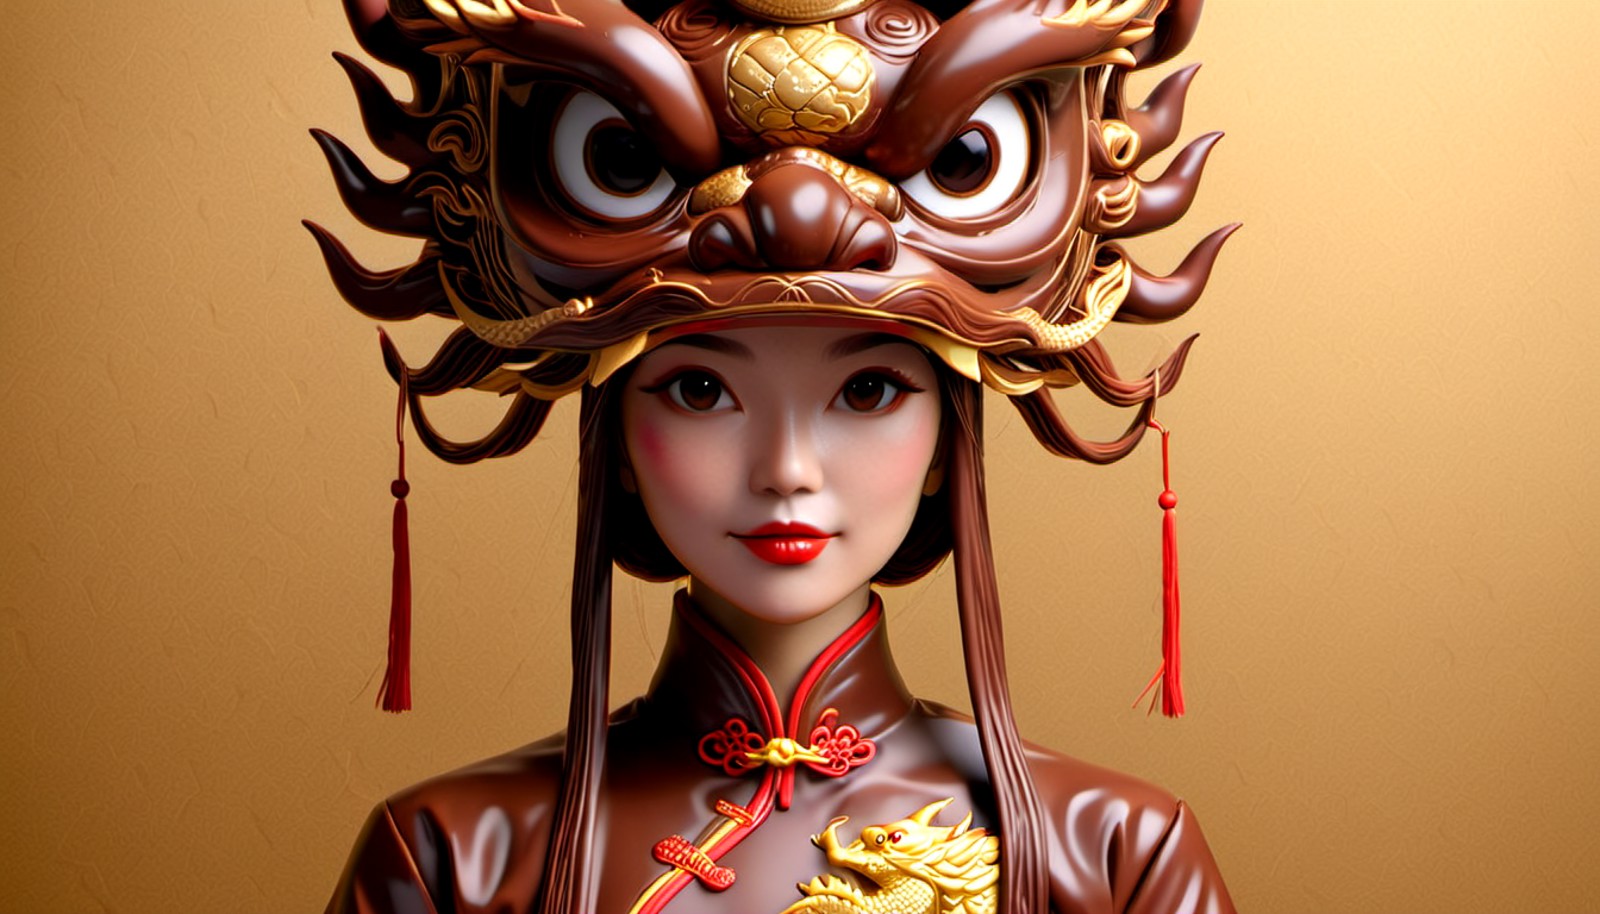 ChocolateRay, woman made of chocolate, wearing traditional chinese garb and a Dragon Mask